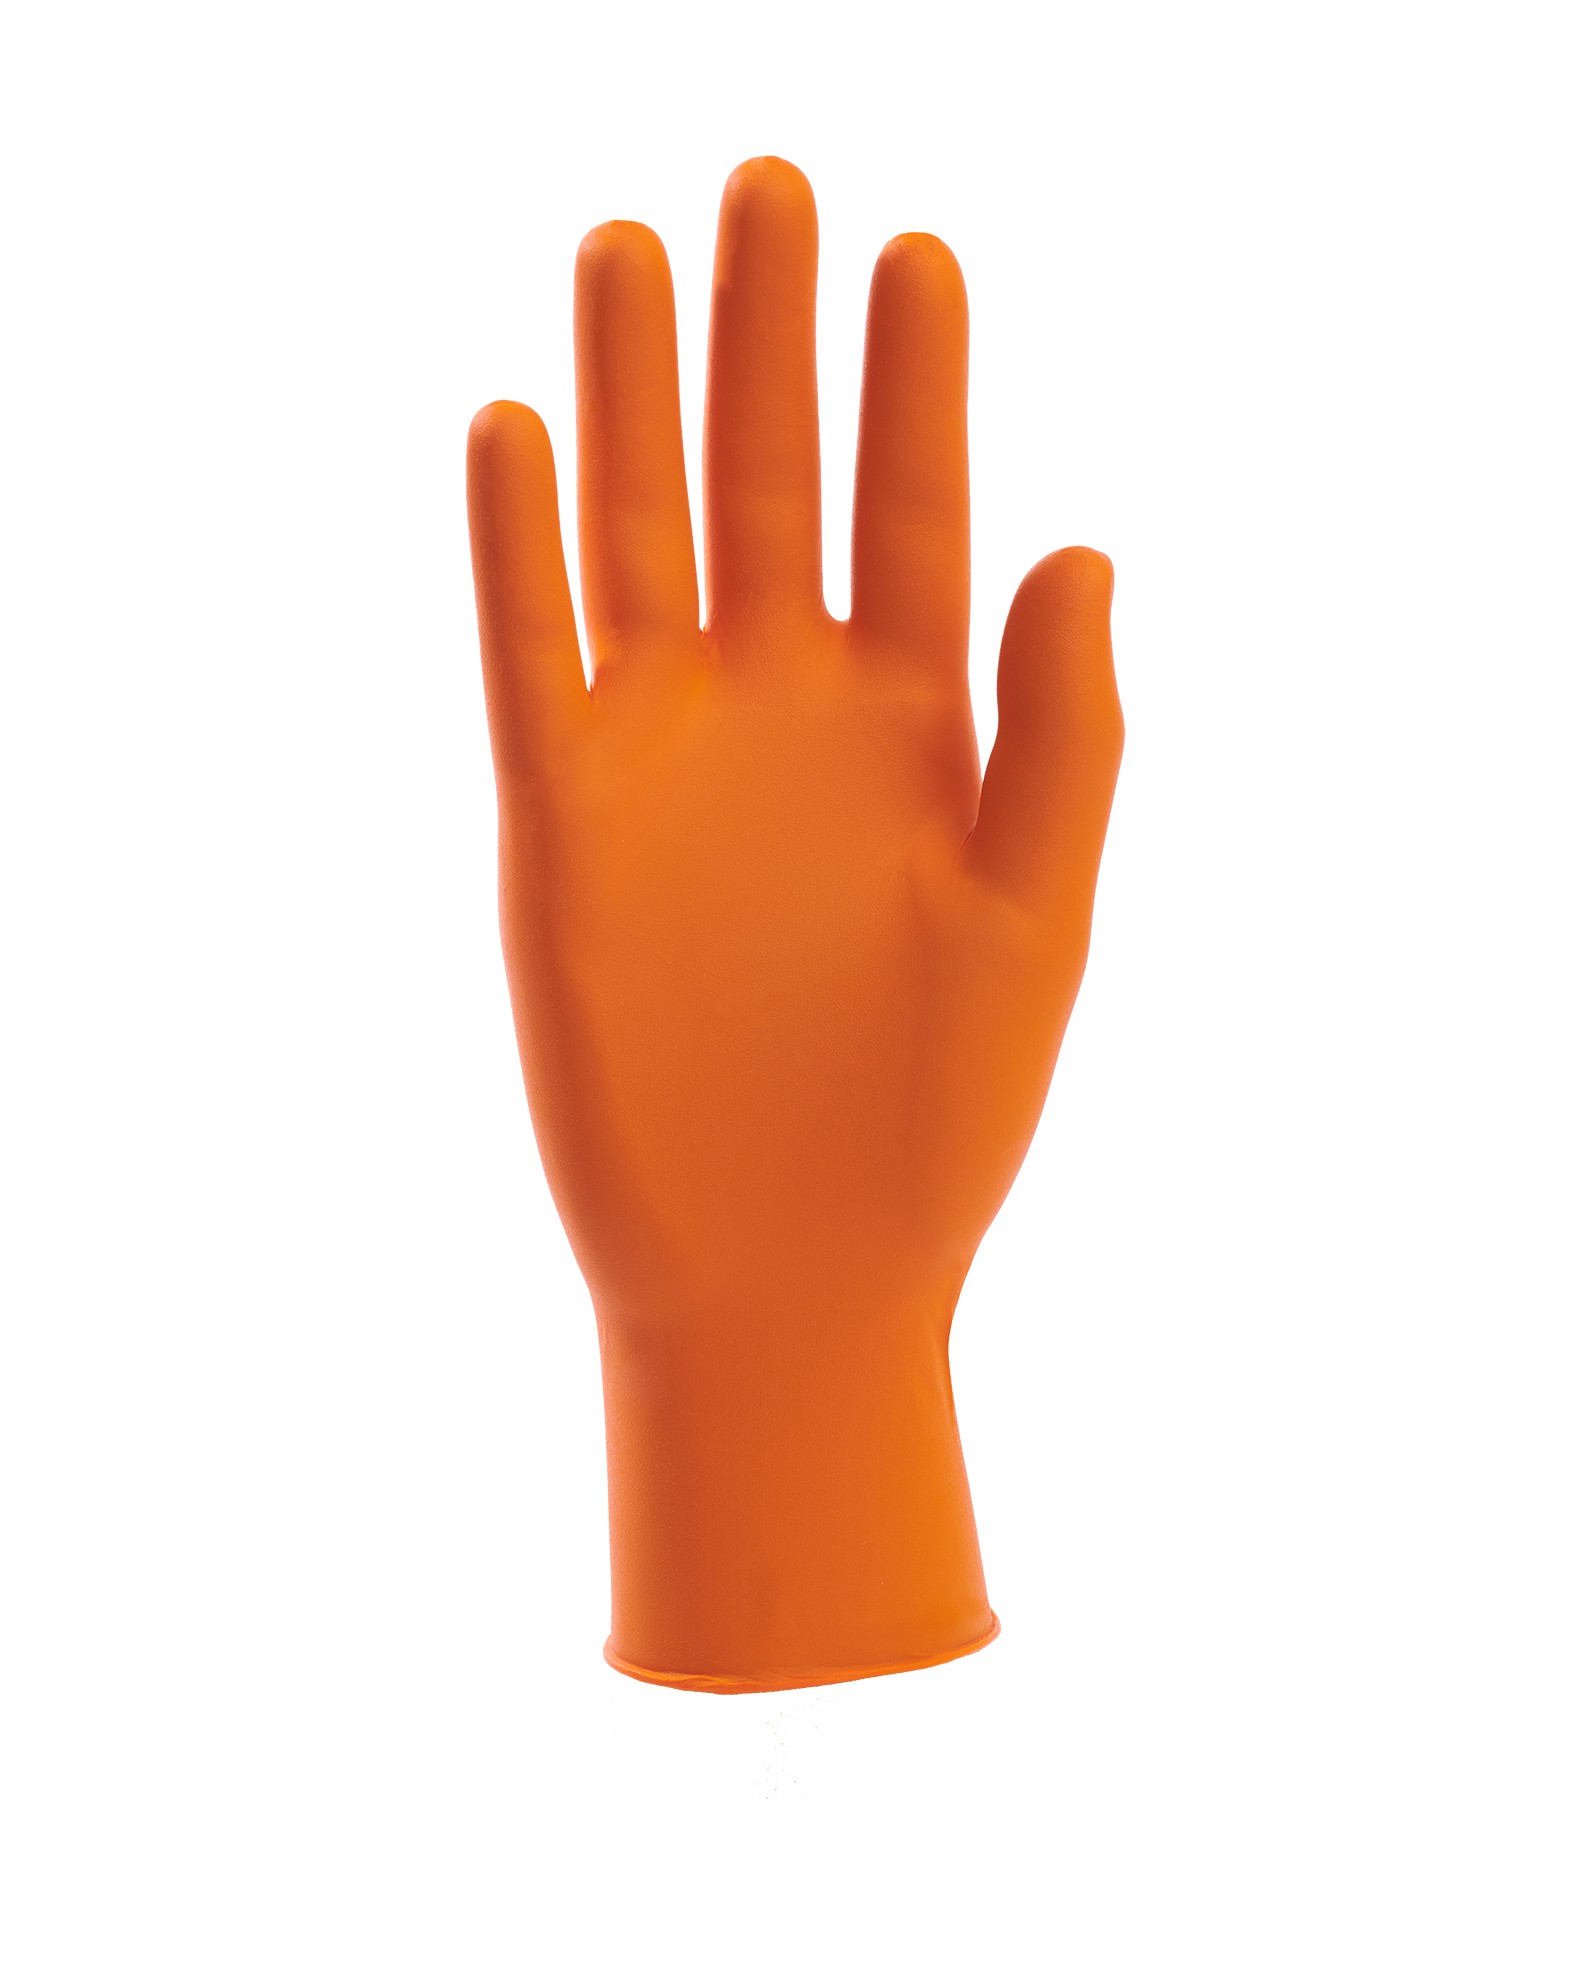 Tyre-Tread Textured Commercial Powder Free Disposable Nitrile Gloves 240mm Size XL 6 mil 1000 Orange 10 Boxes of 100 